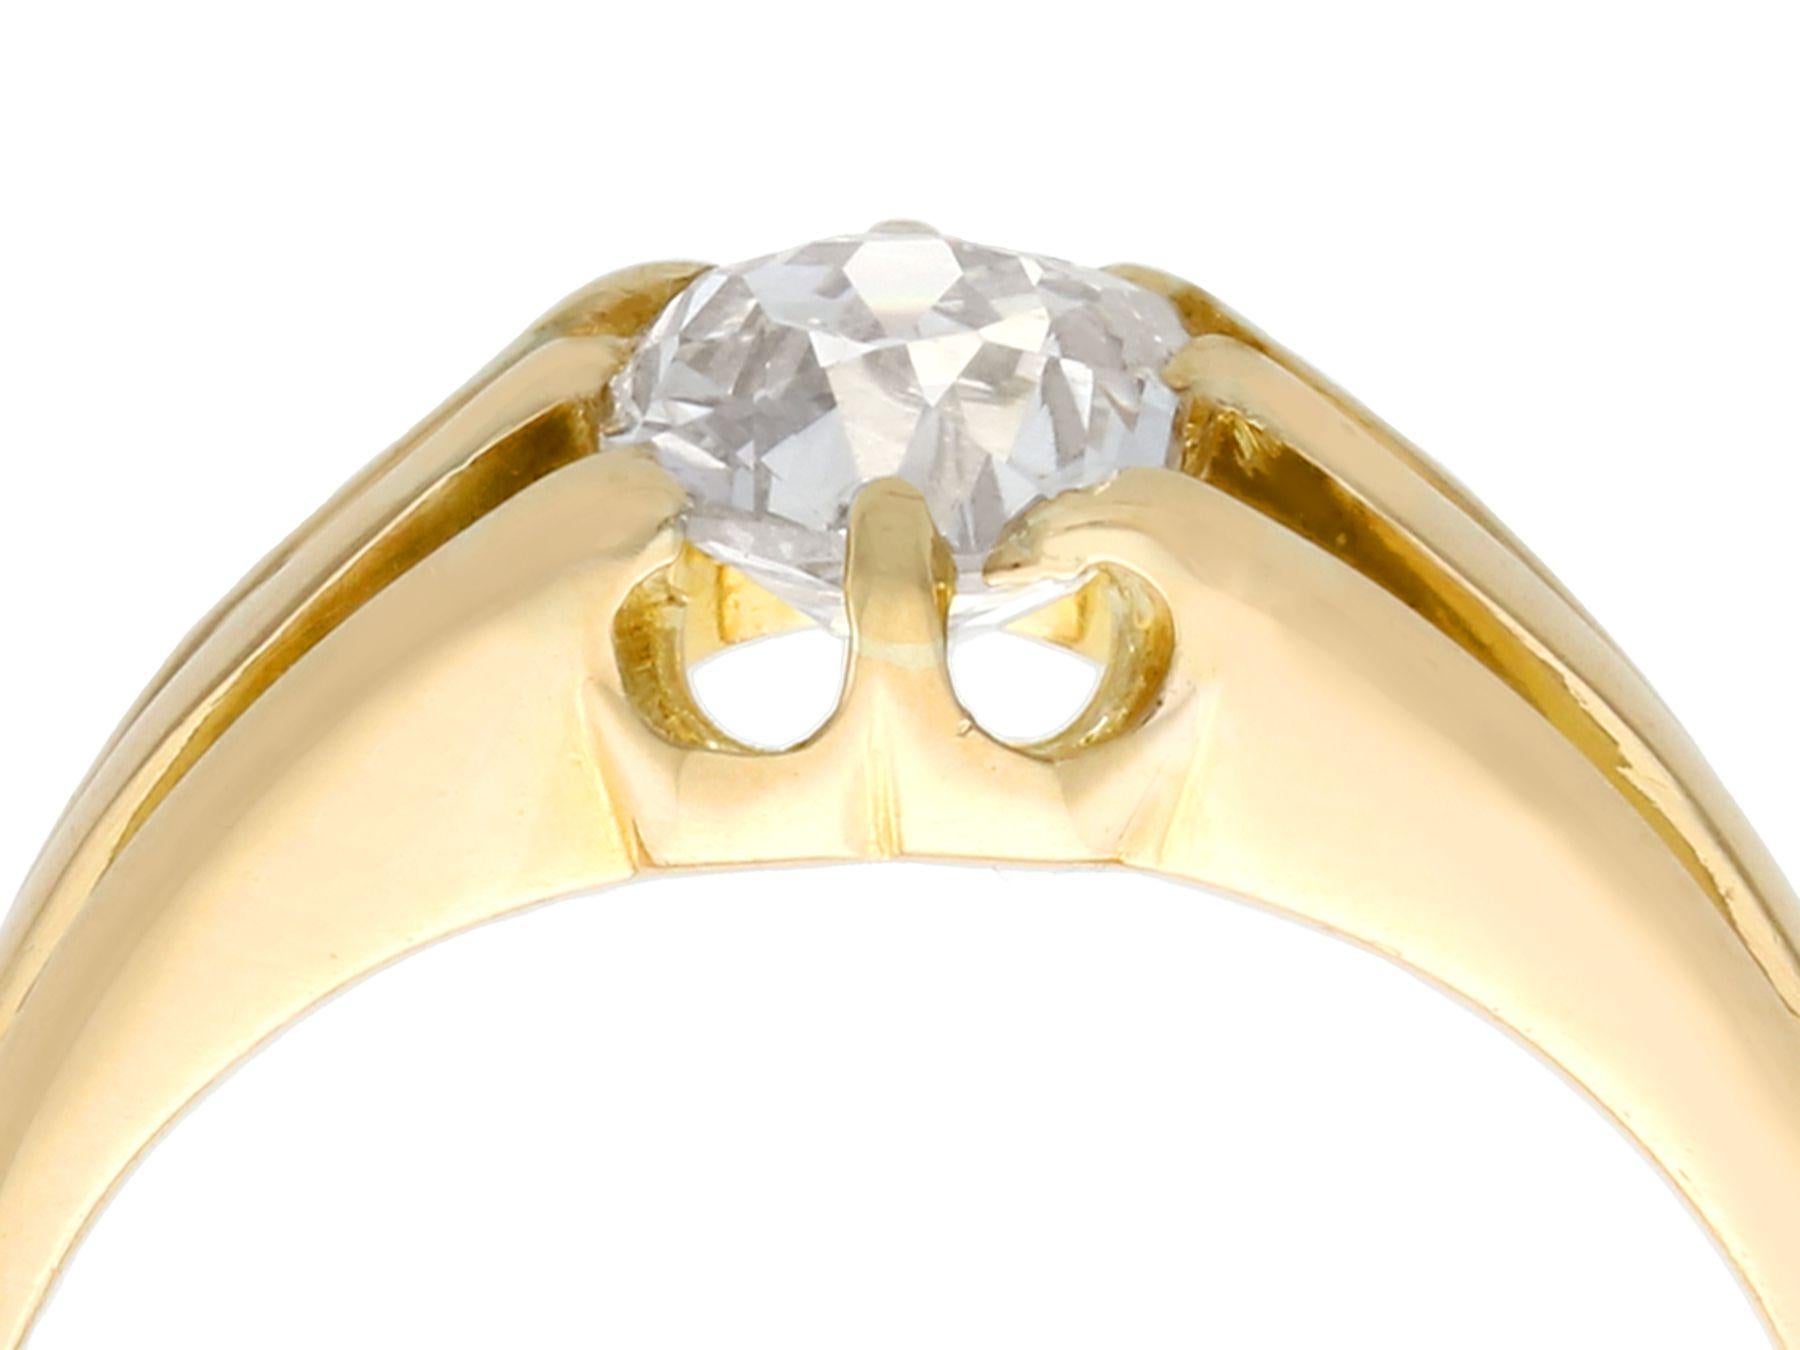 A stunning, fine and impressive antique 1.21 carat old European round cut diamond, 18k yellow gold solitaire ring; an addition to our antique estate jewelry collections.

This stunning, fine and impressive antique solitaire ring has been crafted in